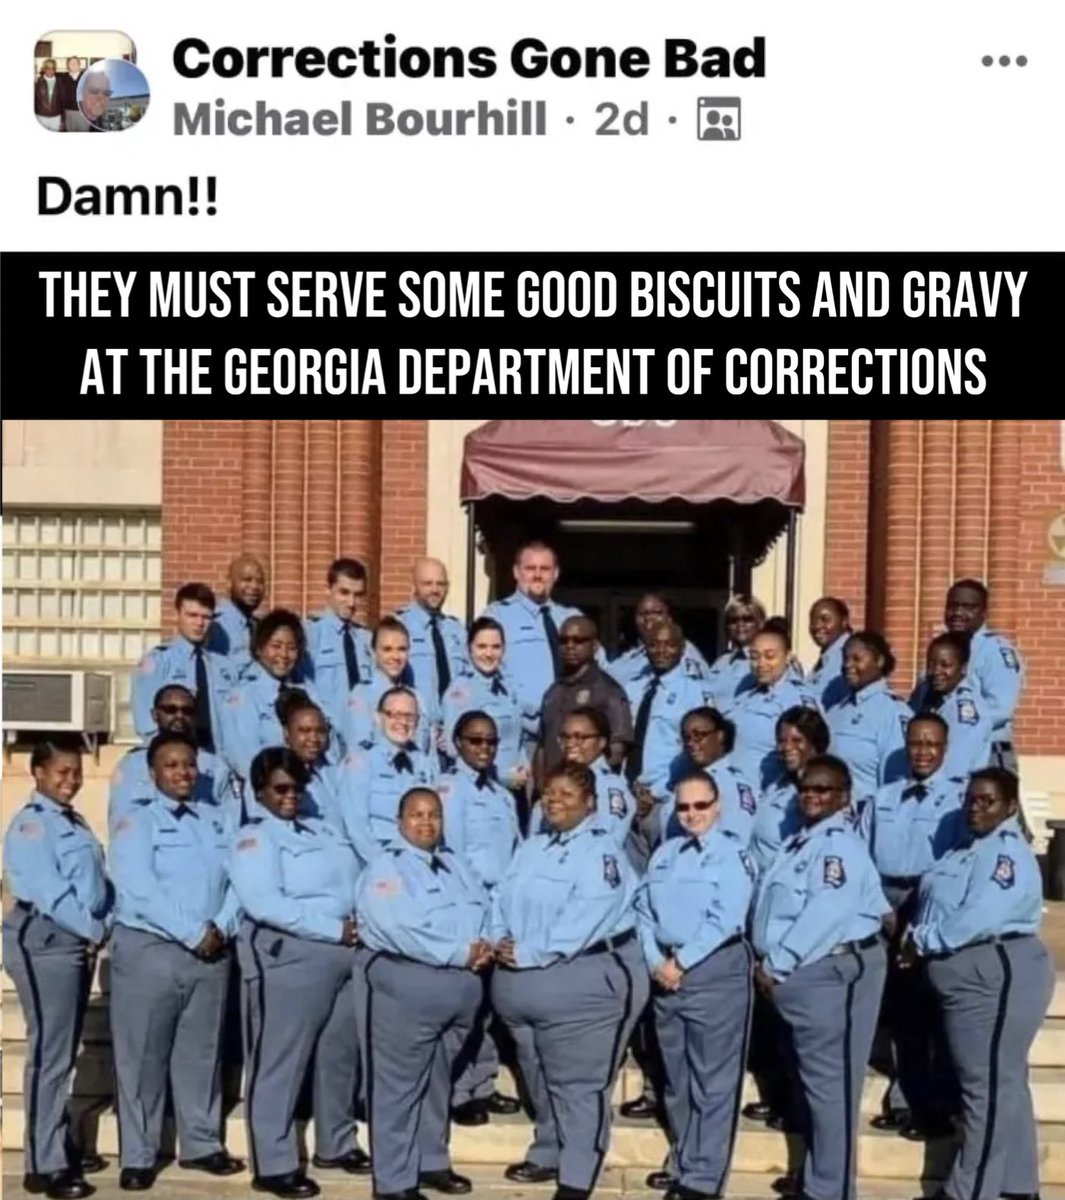 NY Sgt. Michael Bourhill is under an active investigation for posting this meme. He did nothing wrong.